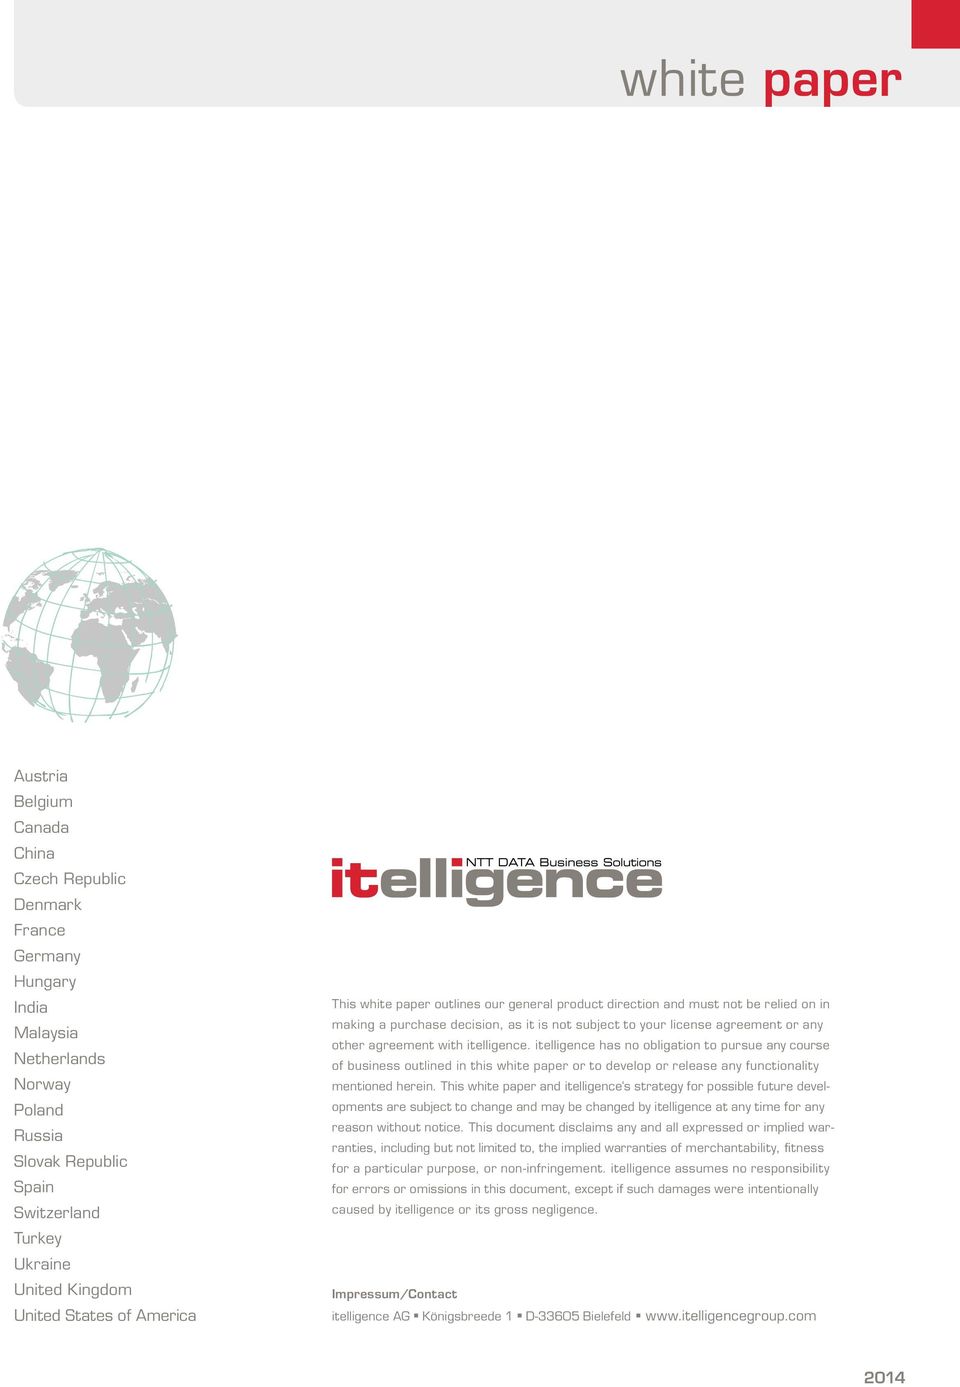 agreement with itelligence. itelligence has no obligation to pursue any course of business outlined in this white paper or to develop or release any functionality mentioned herein.